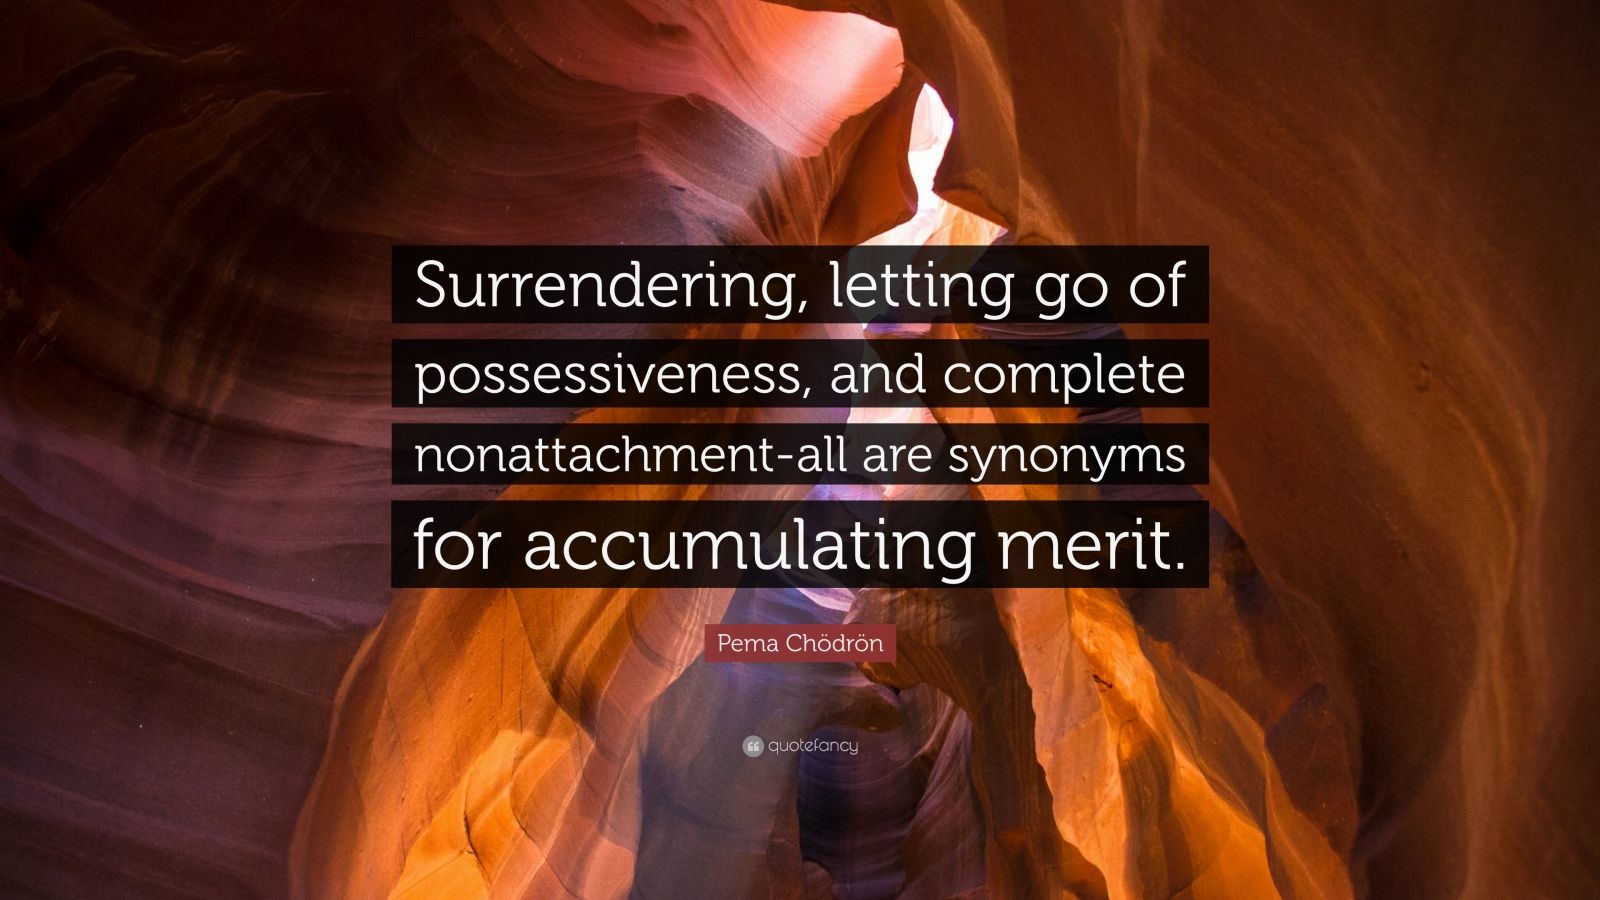 Pema Chödrön Quote: “Surrendering, letting go of possessiveness, and complete nonattachment-all are synonyms for accumulating merit.”